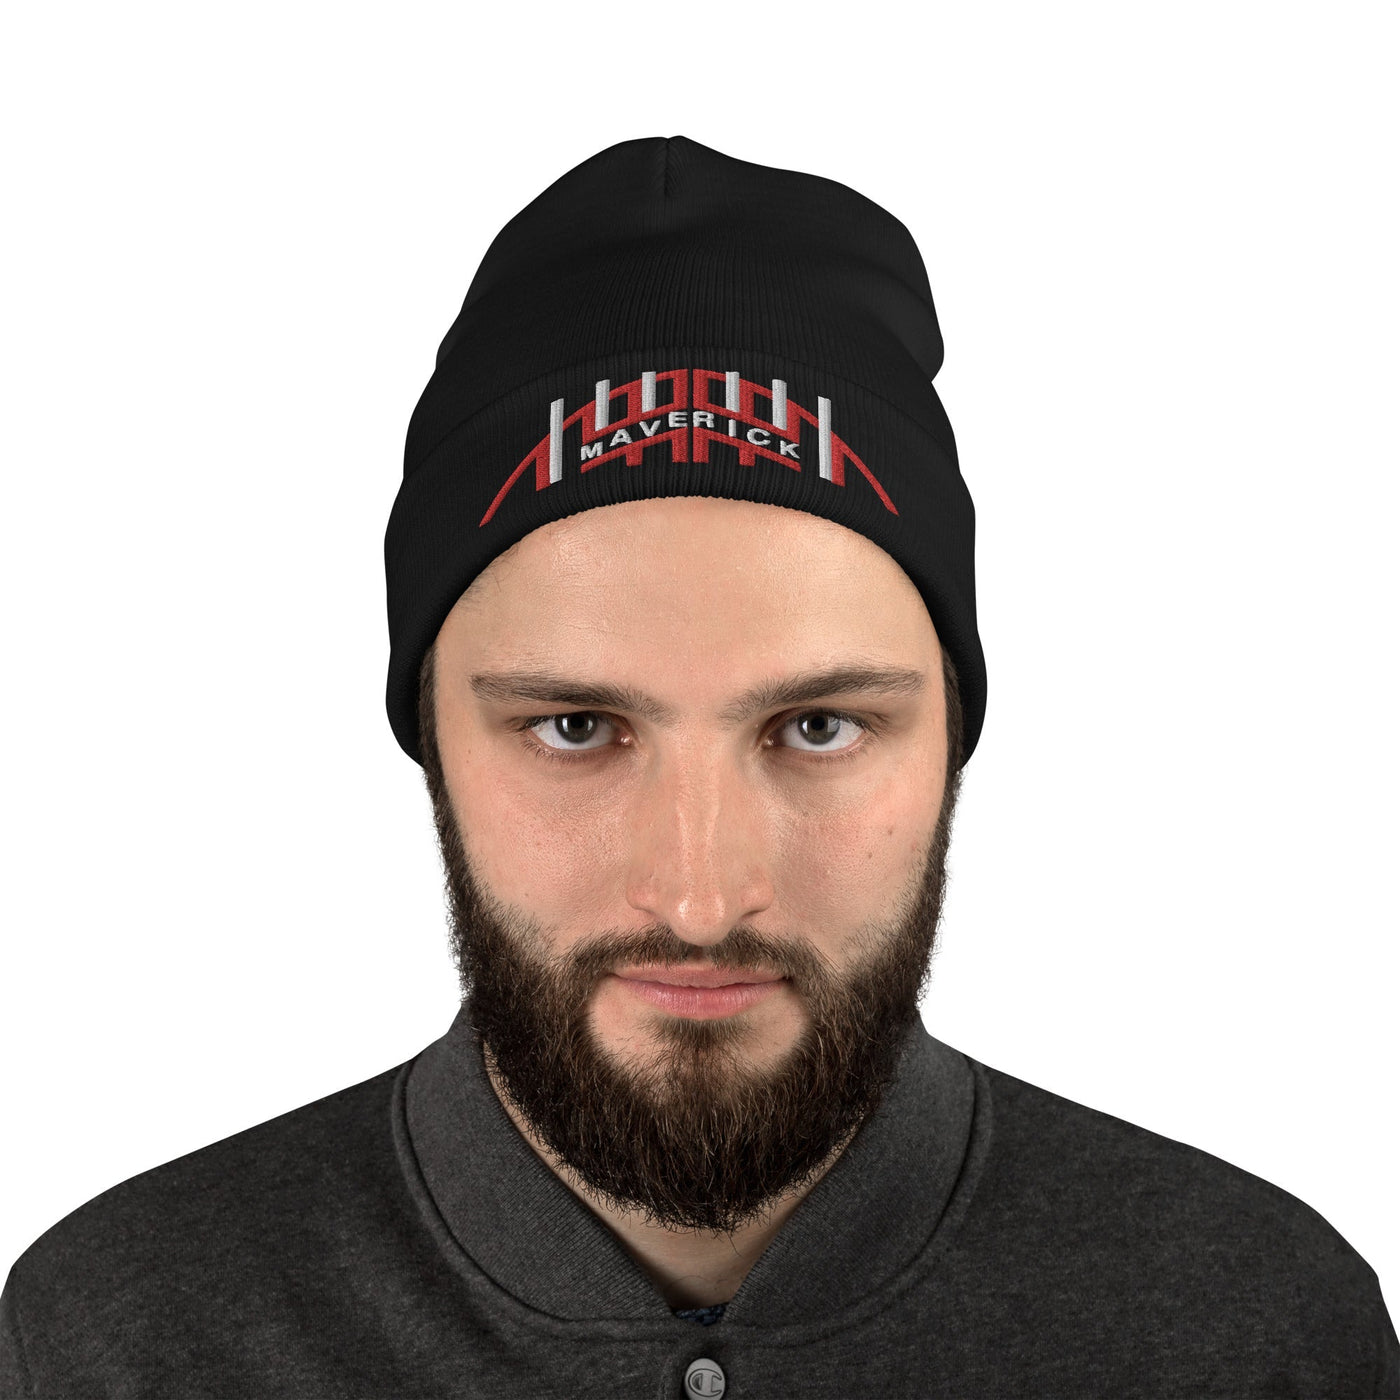 Maverick Top Gun Embroidered Beanie With Classic Helmet Graphic